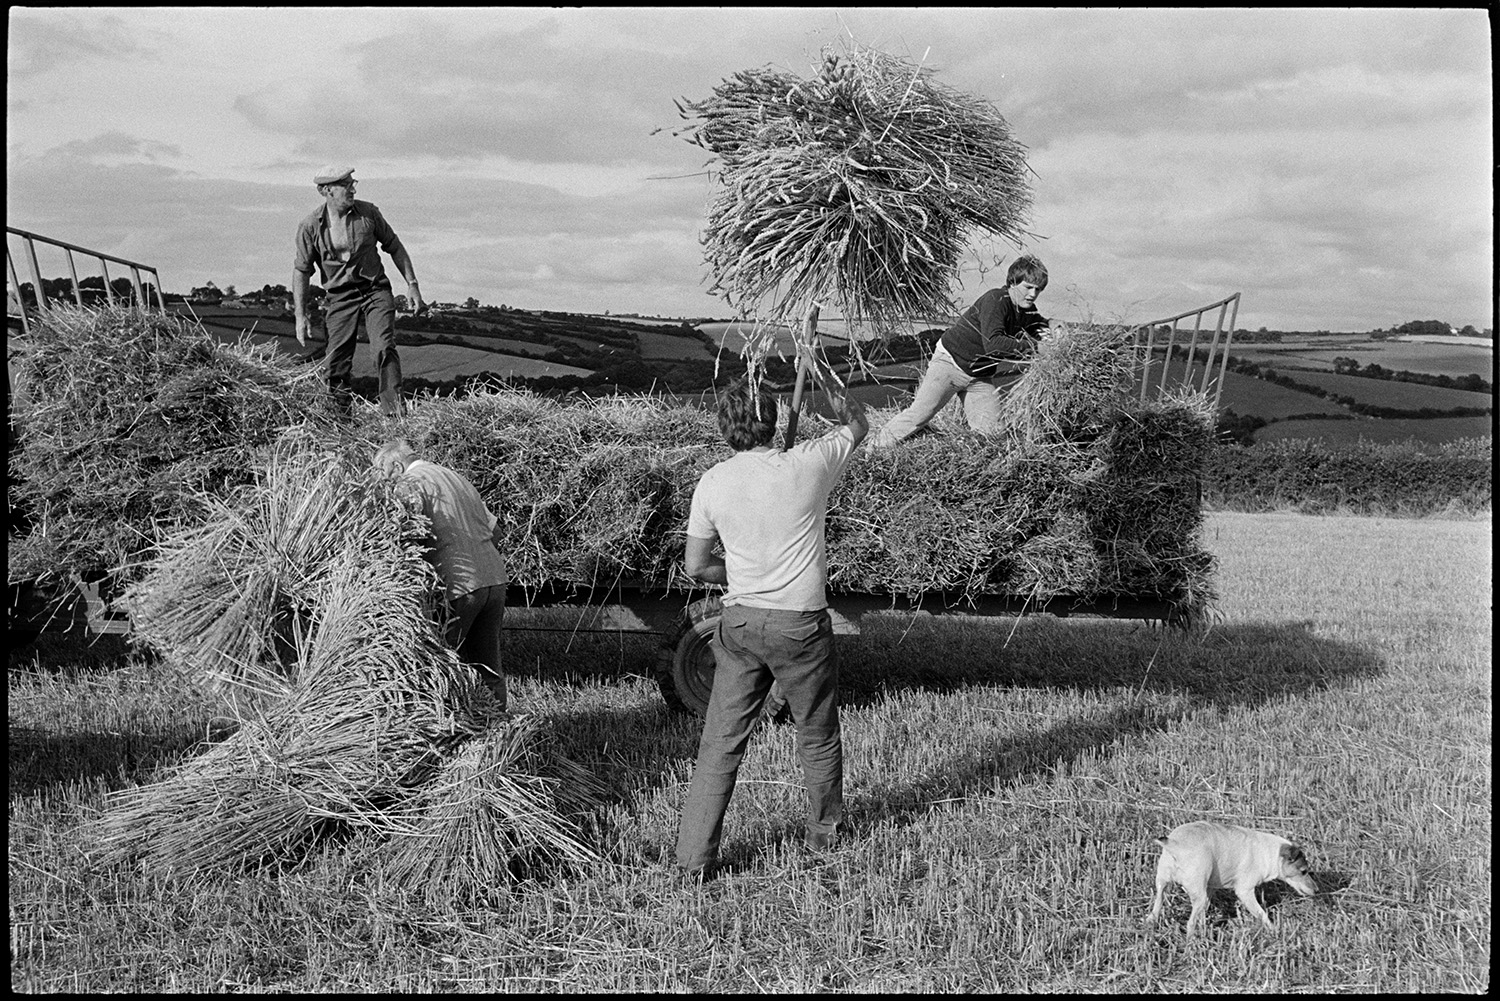 Farmers loading nitches of wheat on to trailer to be taken to reed comber.
[Men loading bundles of corn onto a trailer using pitchforks in a field at Spittle, Chulmleigh. A terrier dog is with them.]